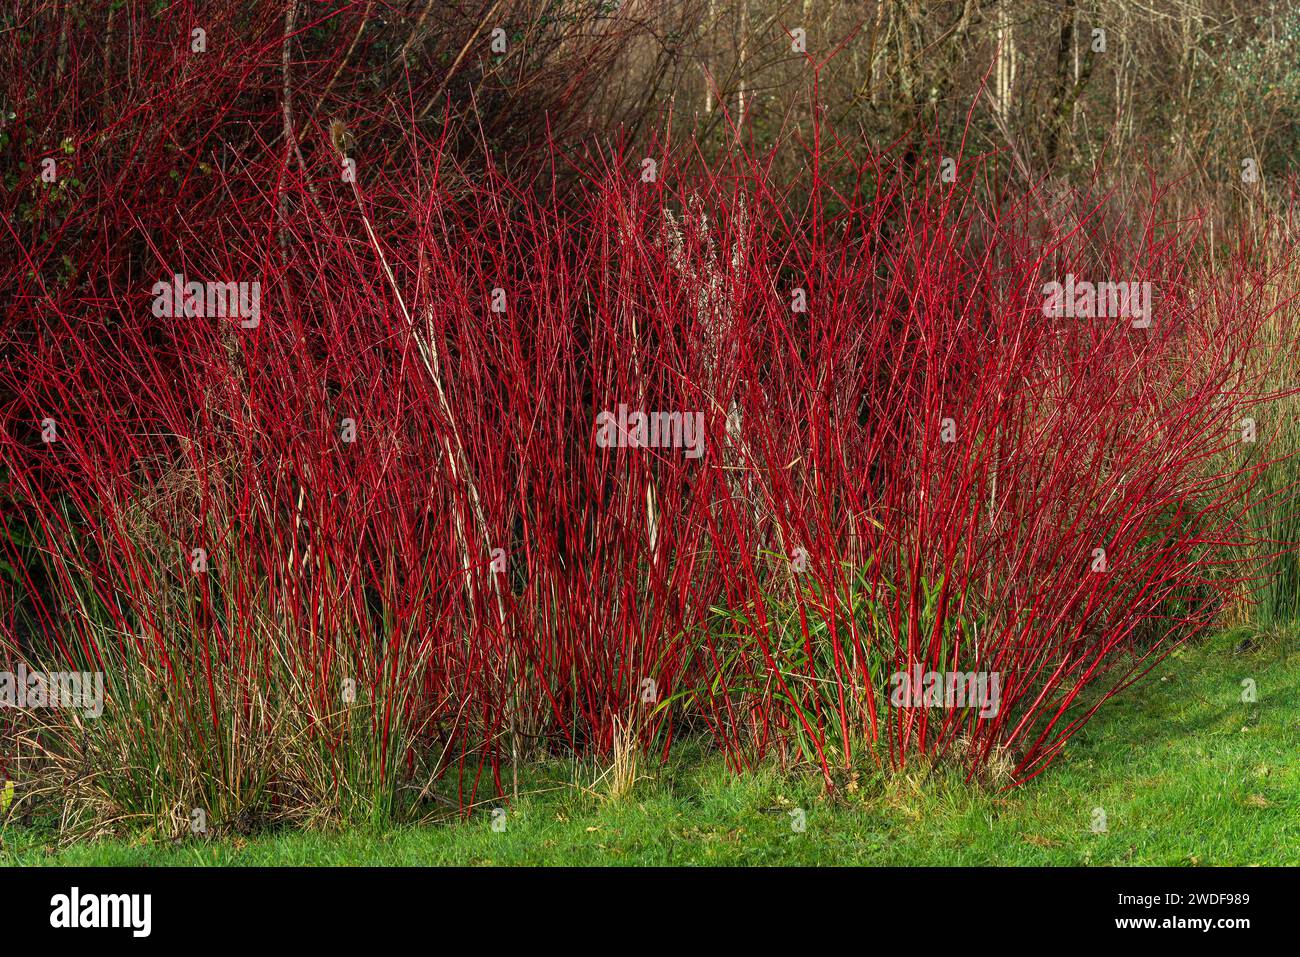 Cornus alba shrub with crimson red stems in winter and red leaves in autumn commonly known as dogwood, stock photo image Stock Photo